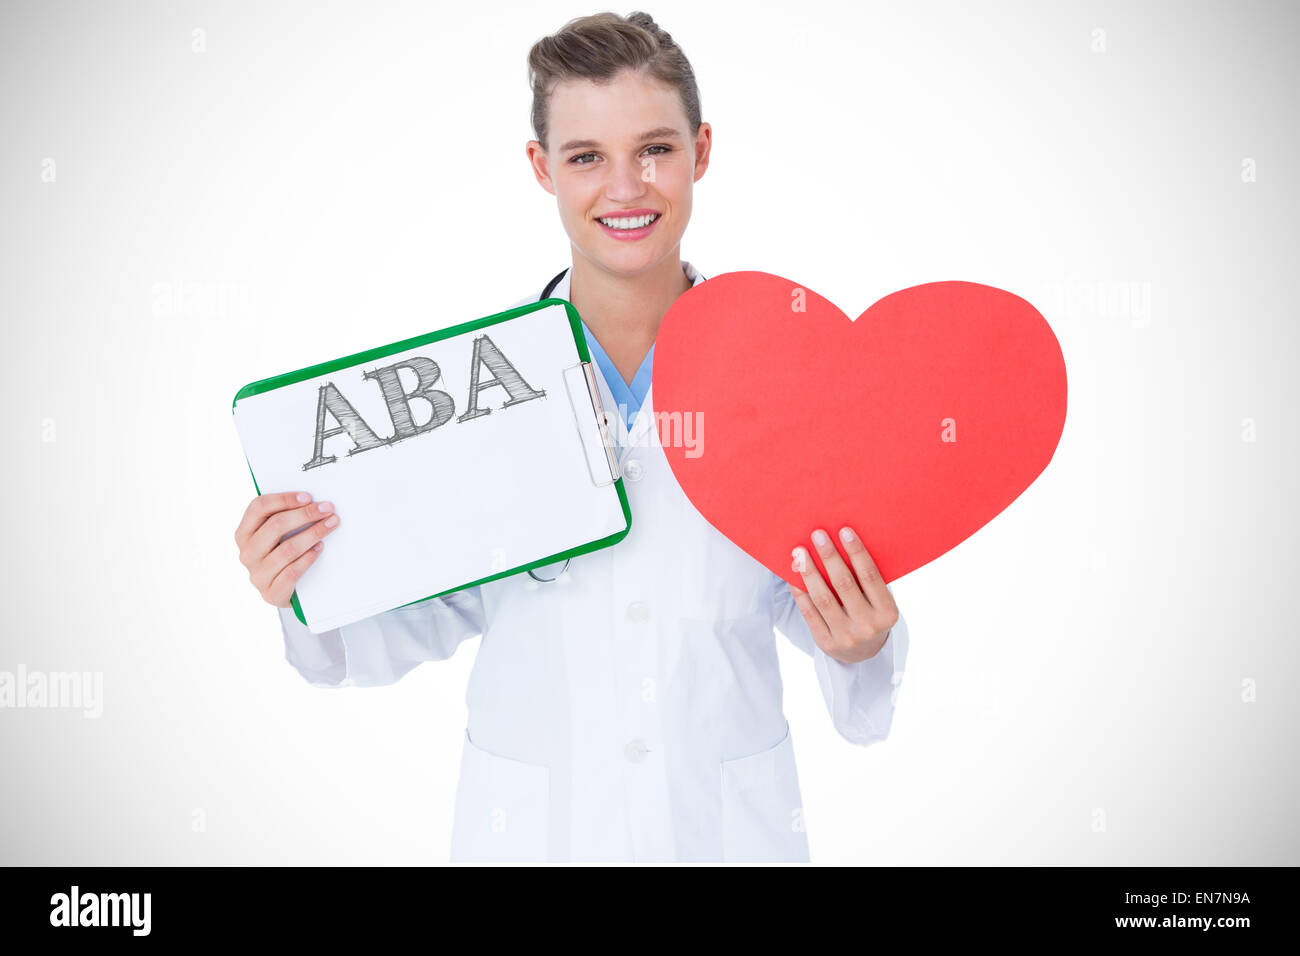 Aba against happy doctor holding clipboard and heart card Stock Photo